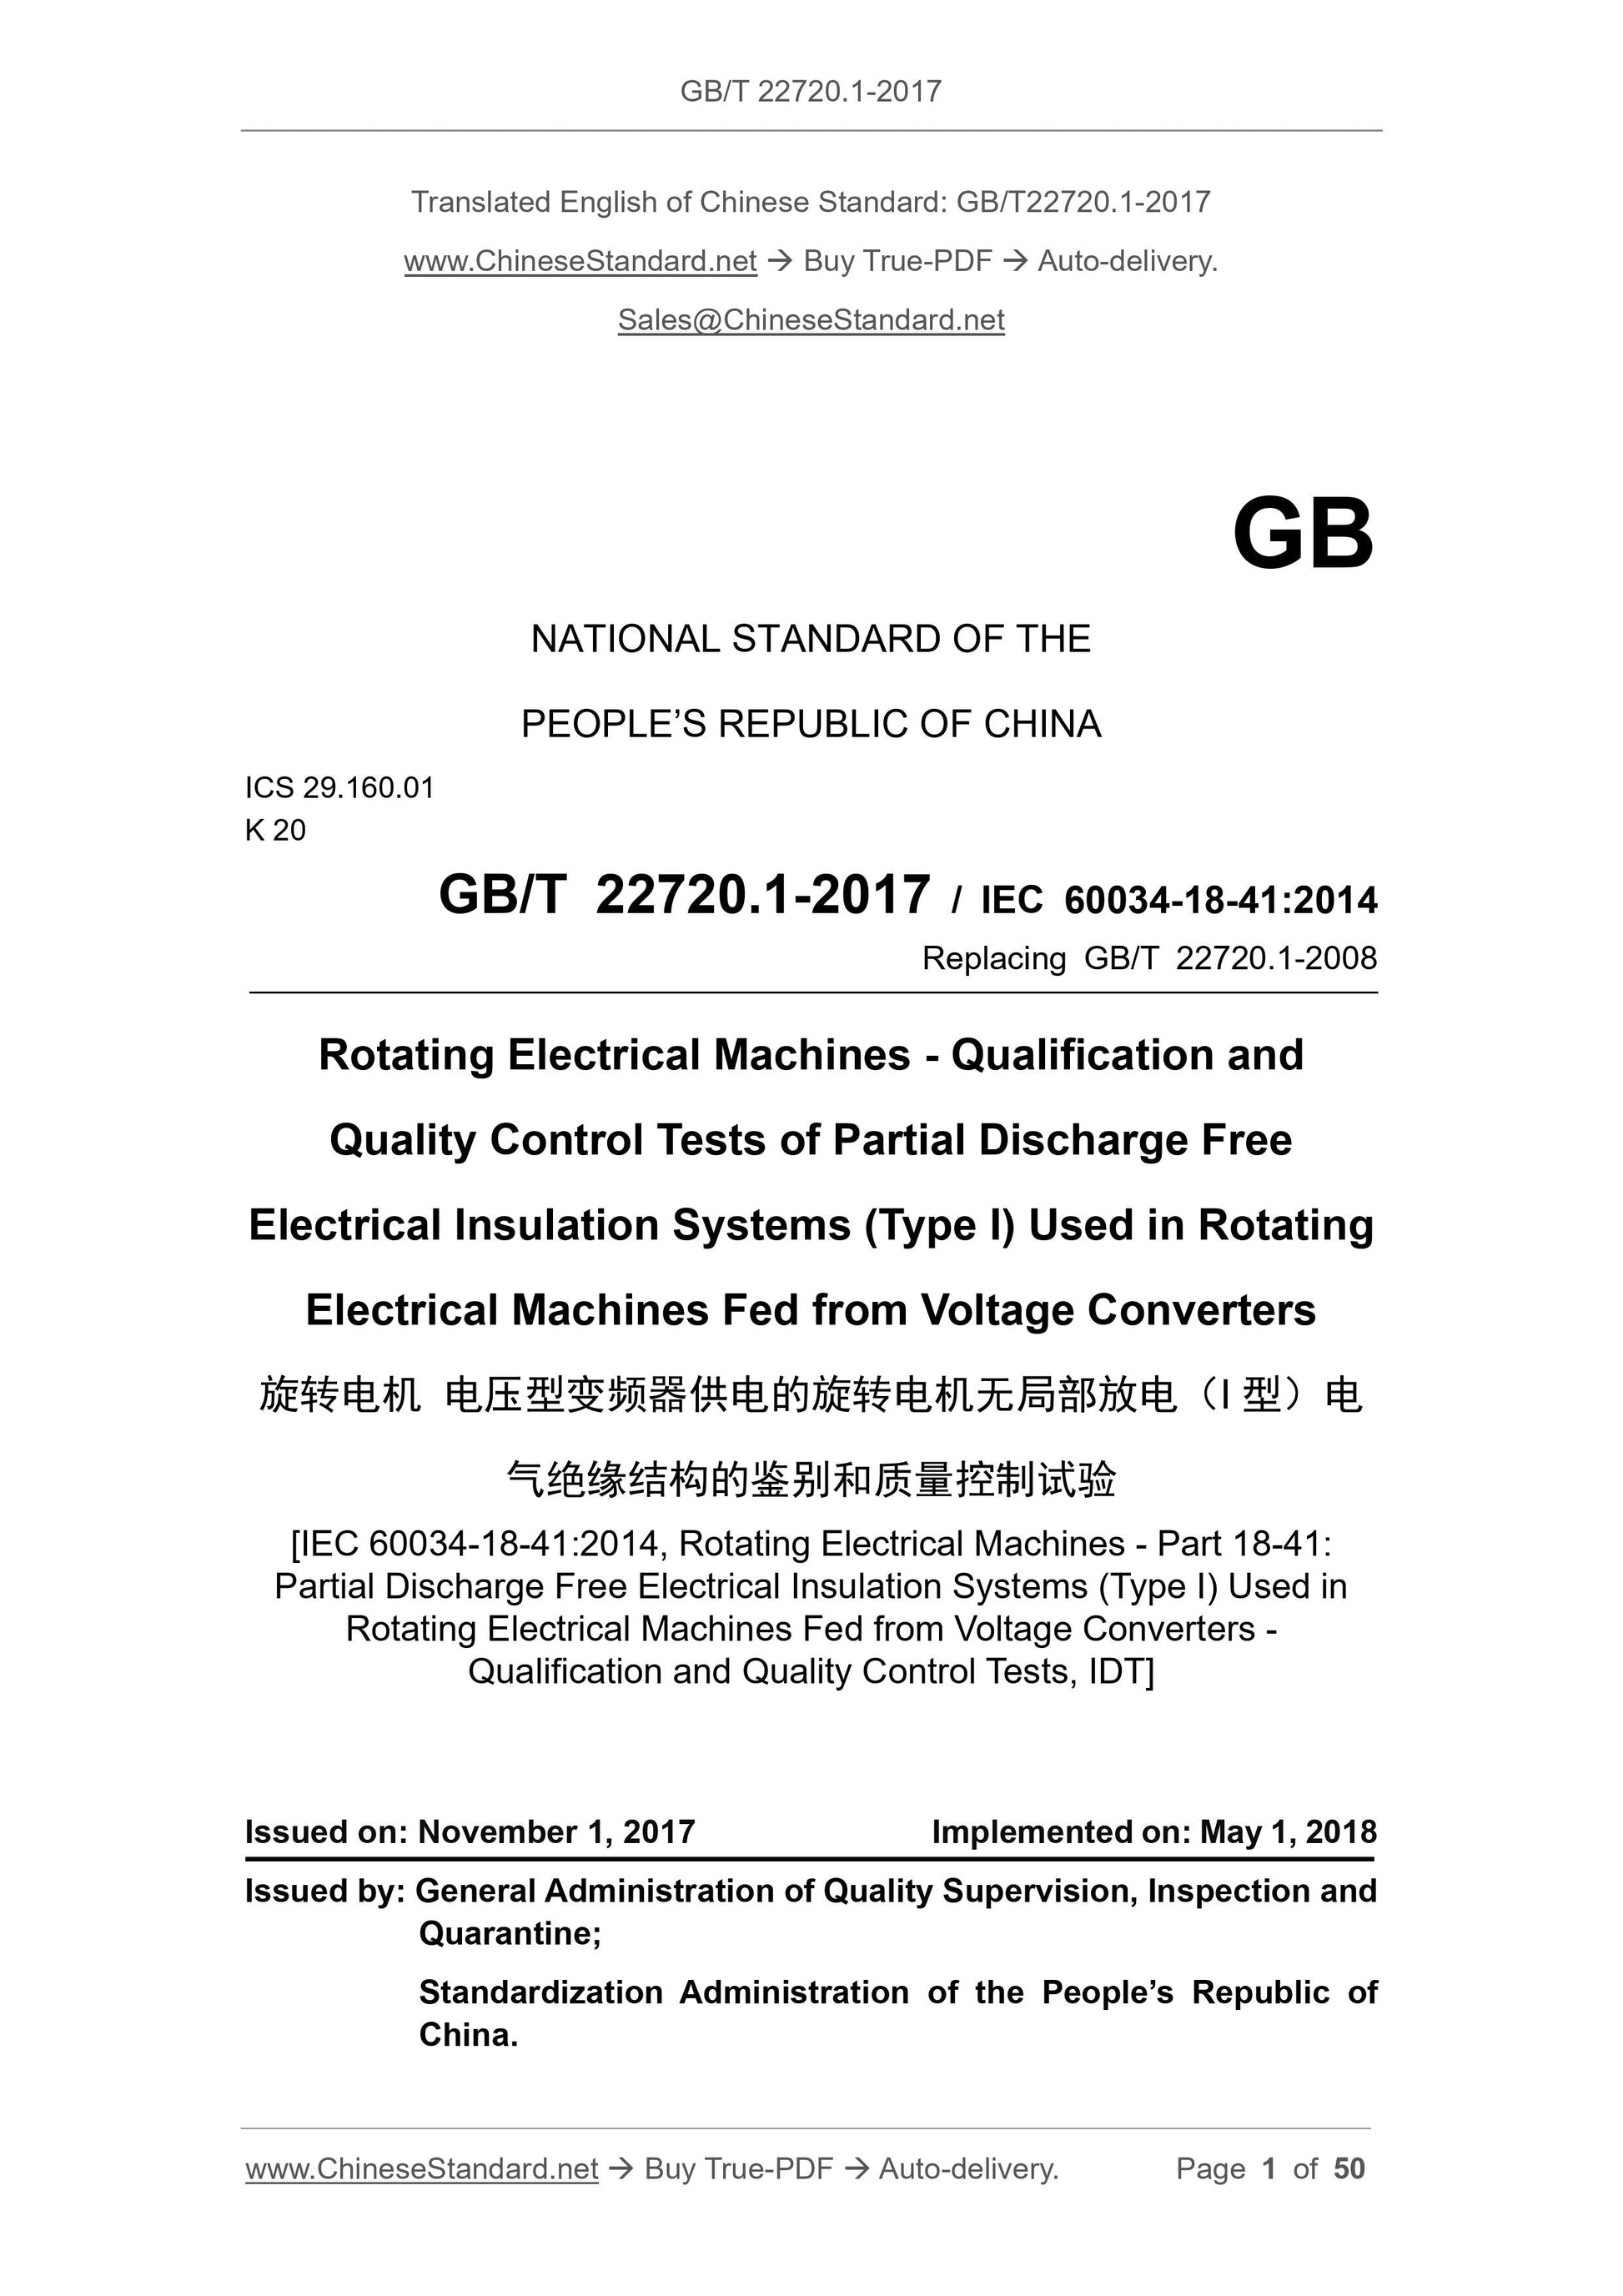 GB/T 22720.1-2017 Page 1